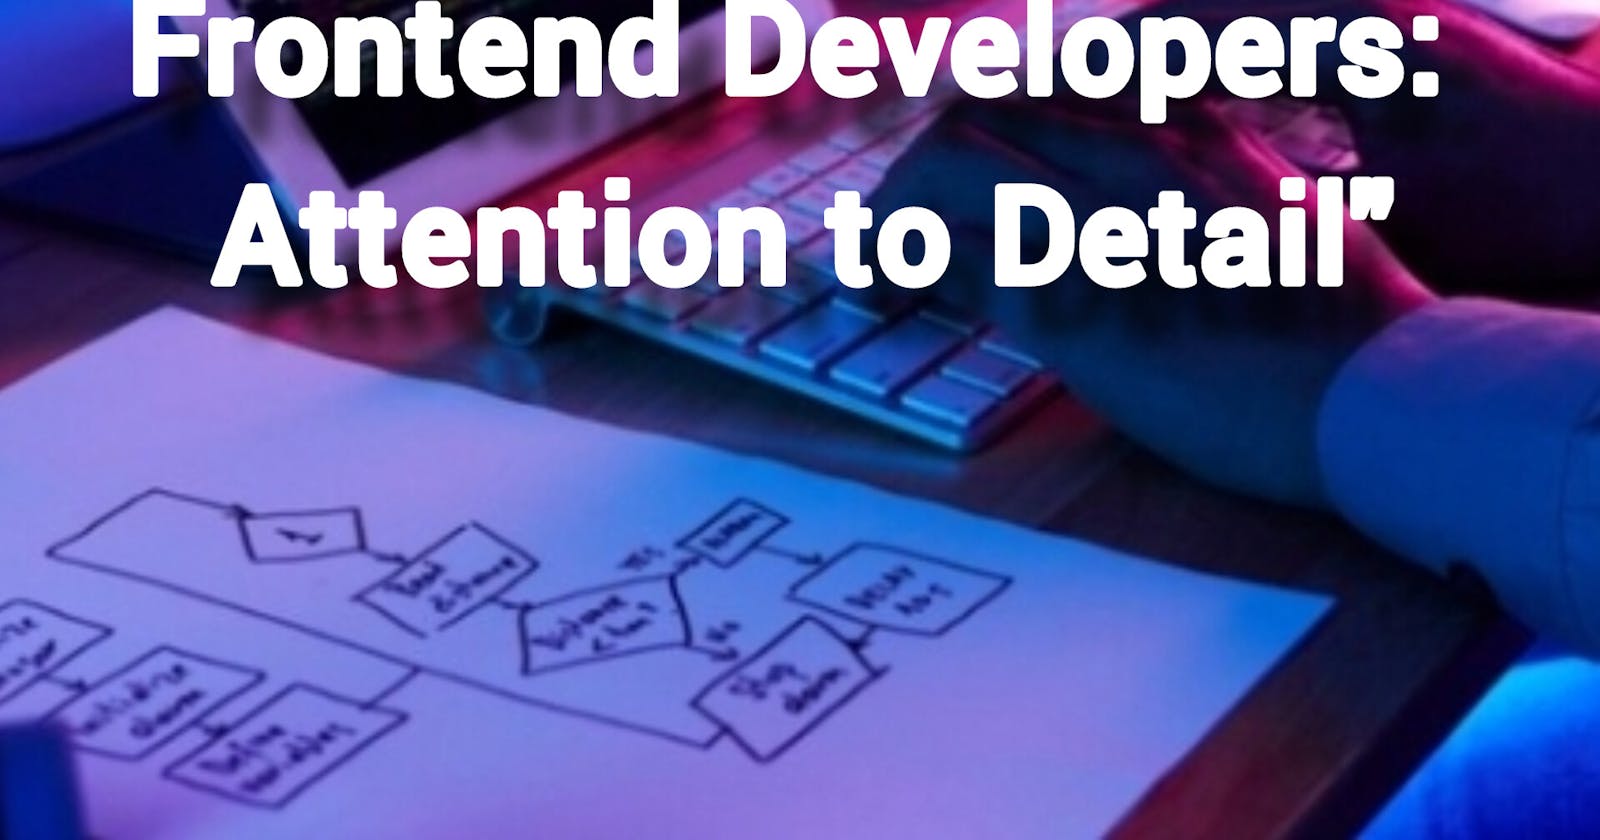 The Essential Skill for Frontend Developers: Attention to Detail"